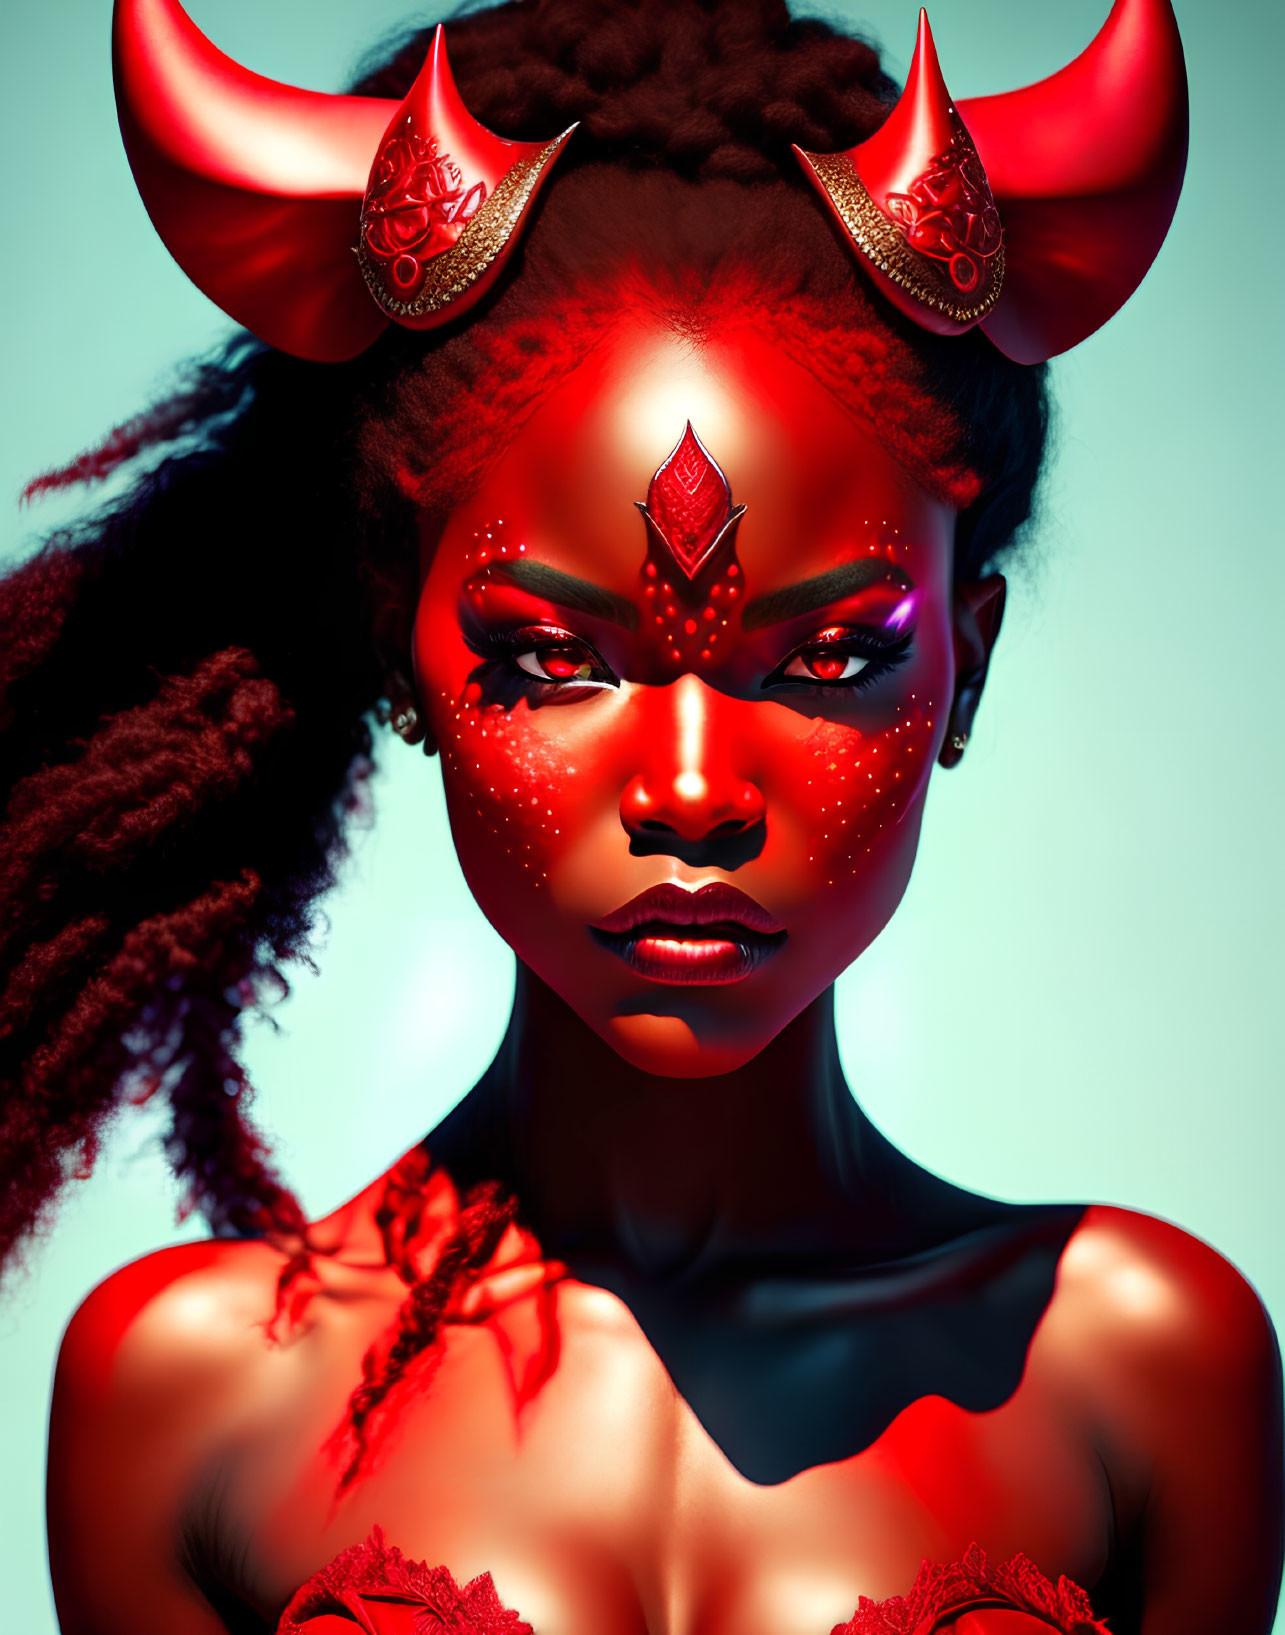 Woman with red makeup and horns in fierce pose on blue background